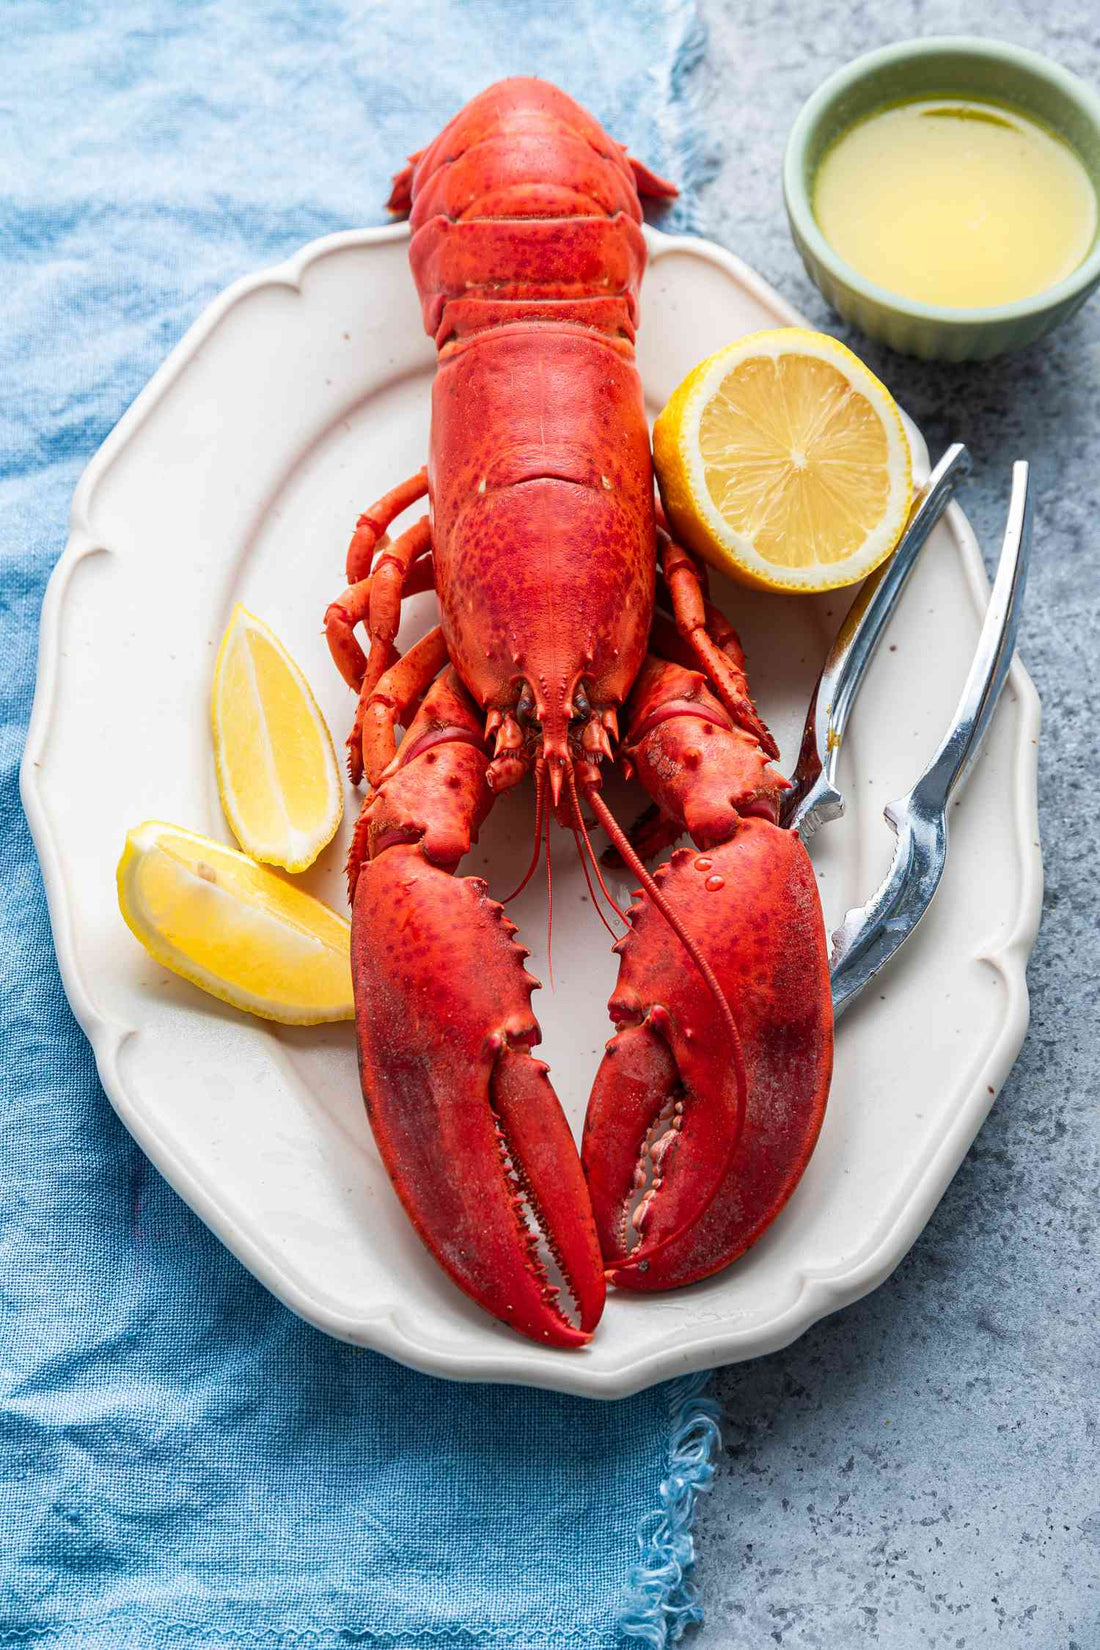 How to cook a live 1.5lb lobster.